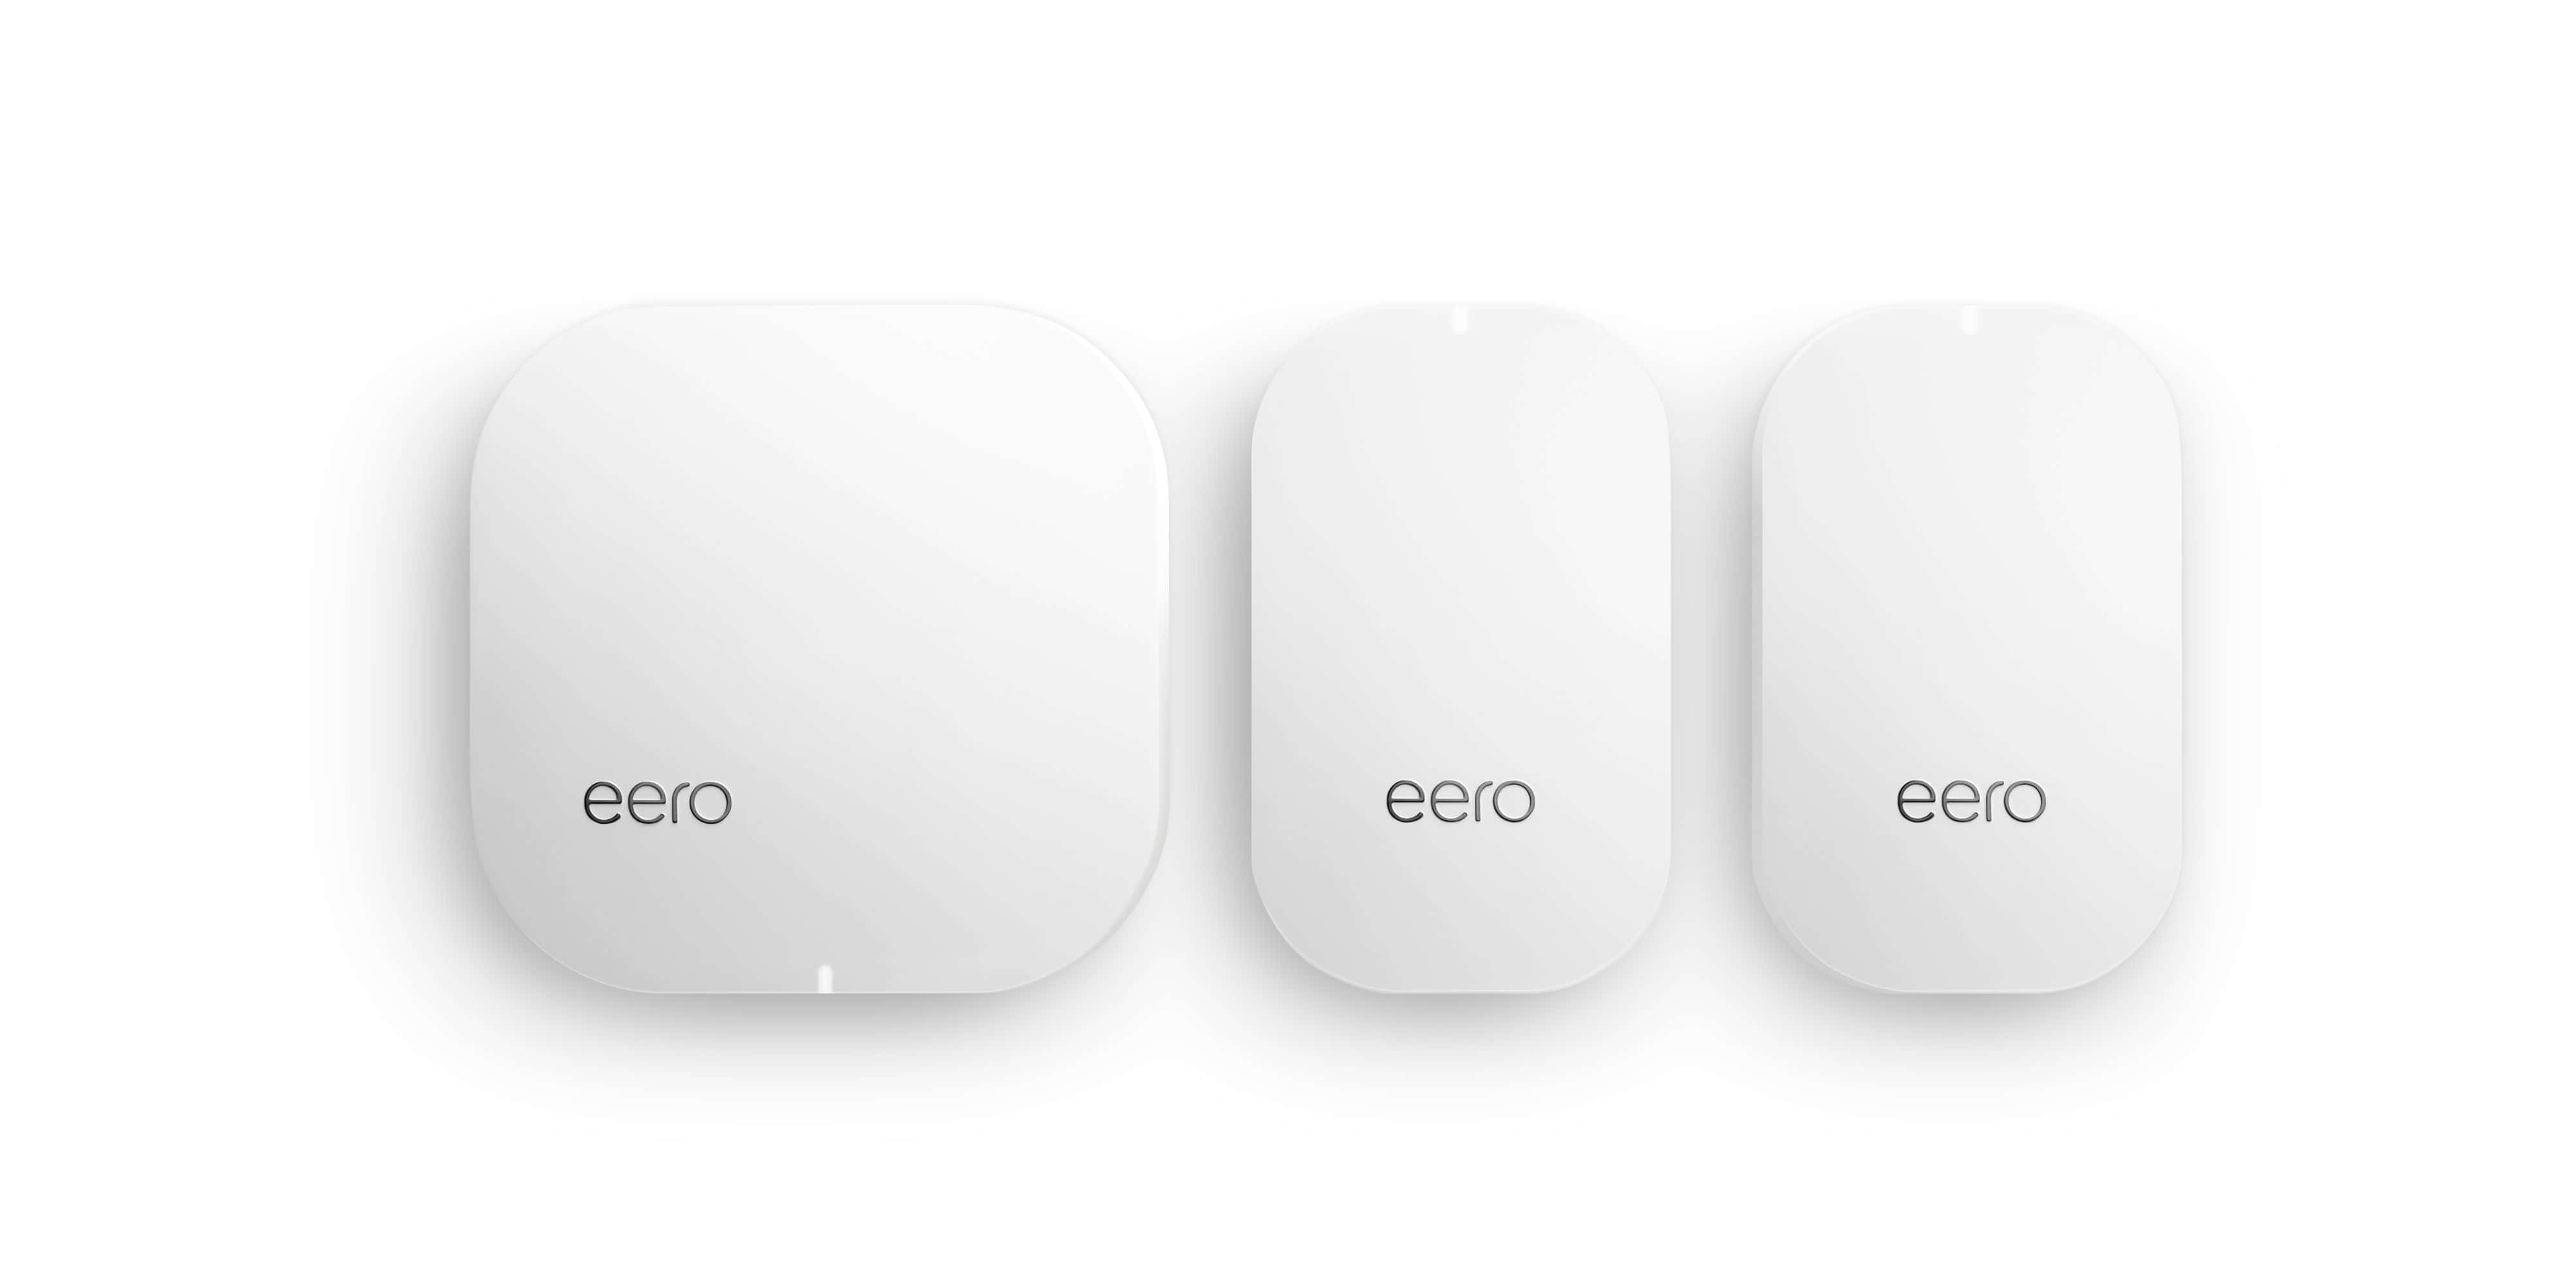 My home mesh is made up of an Eero gateway and two Eero beacons.